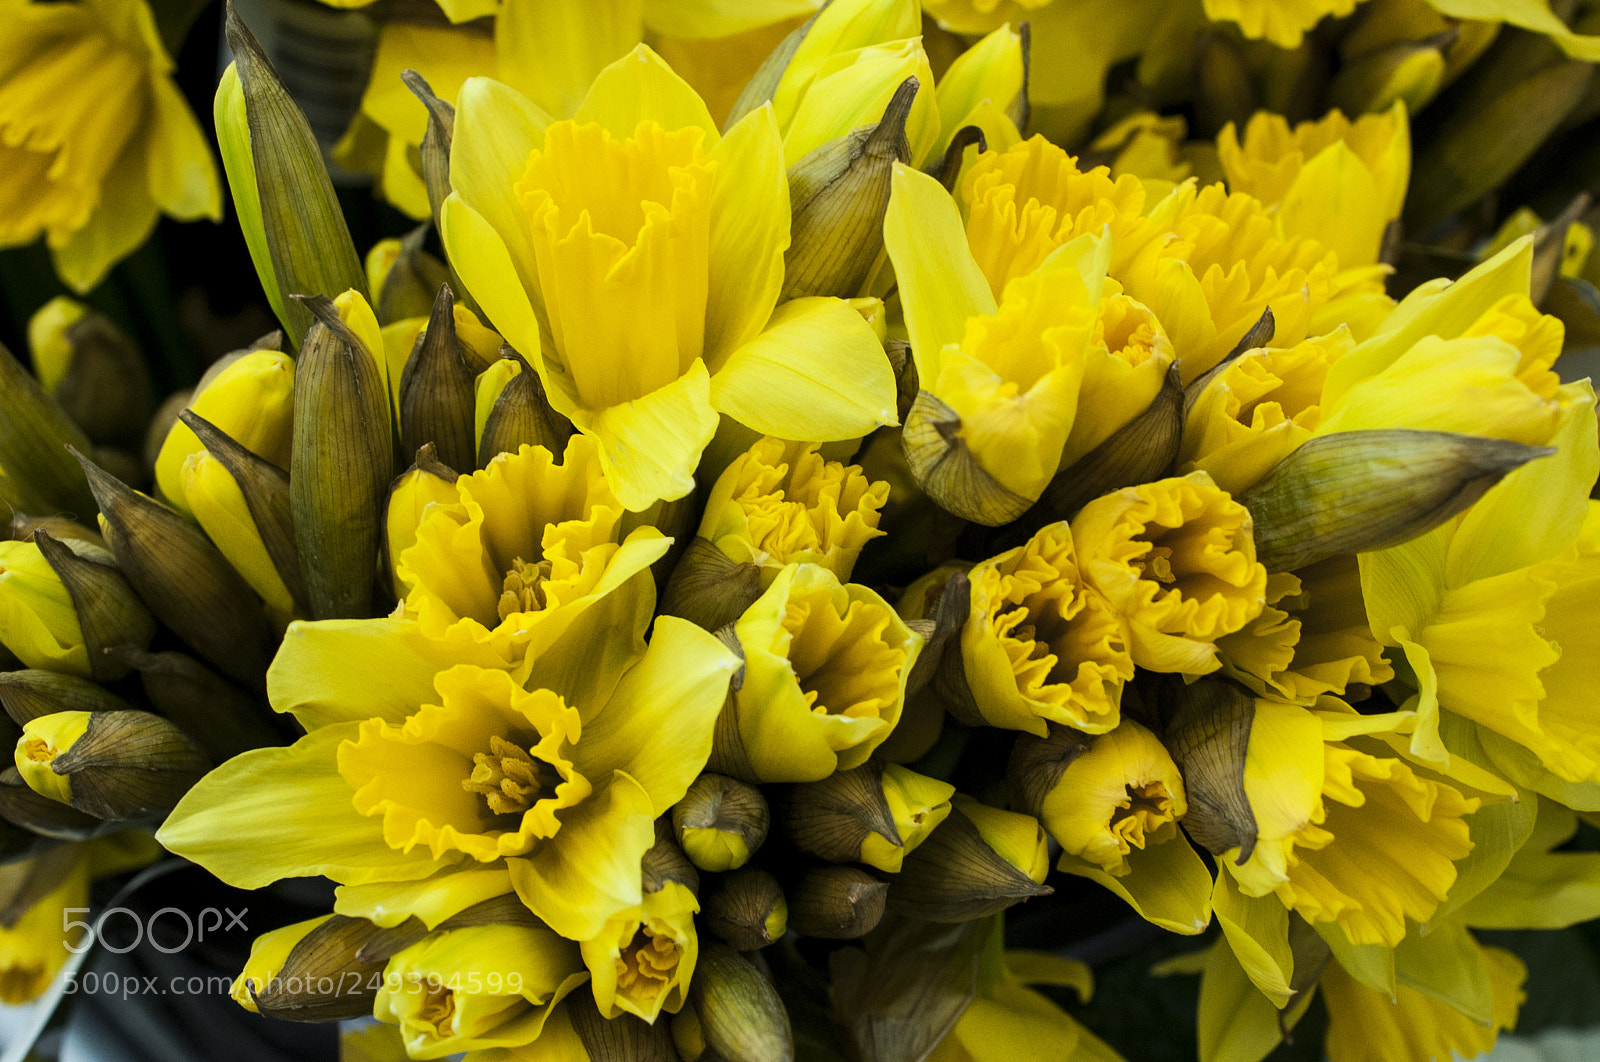 Nikon D700 sample photo. The daffodils are a photography